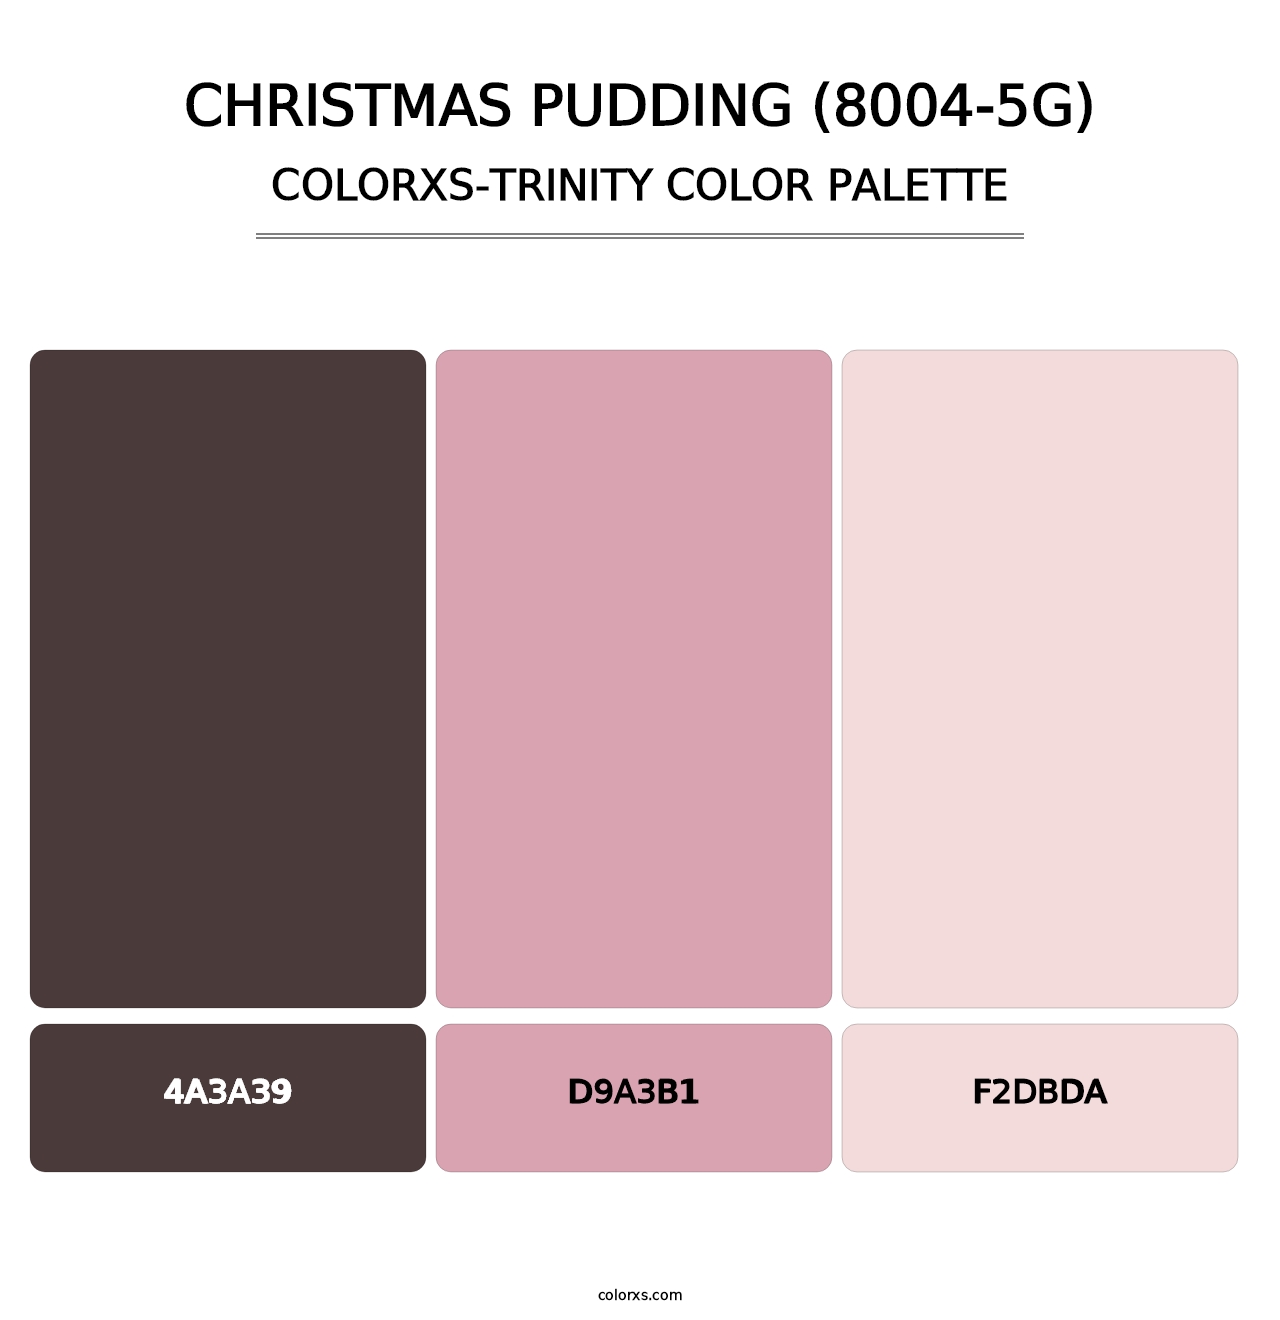 Christmas Pudding (8004-5G) - Colorxs Trinity Palette